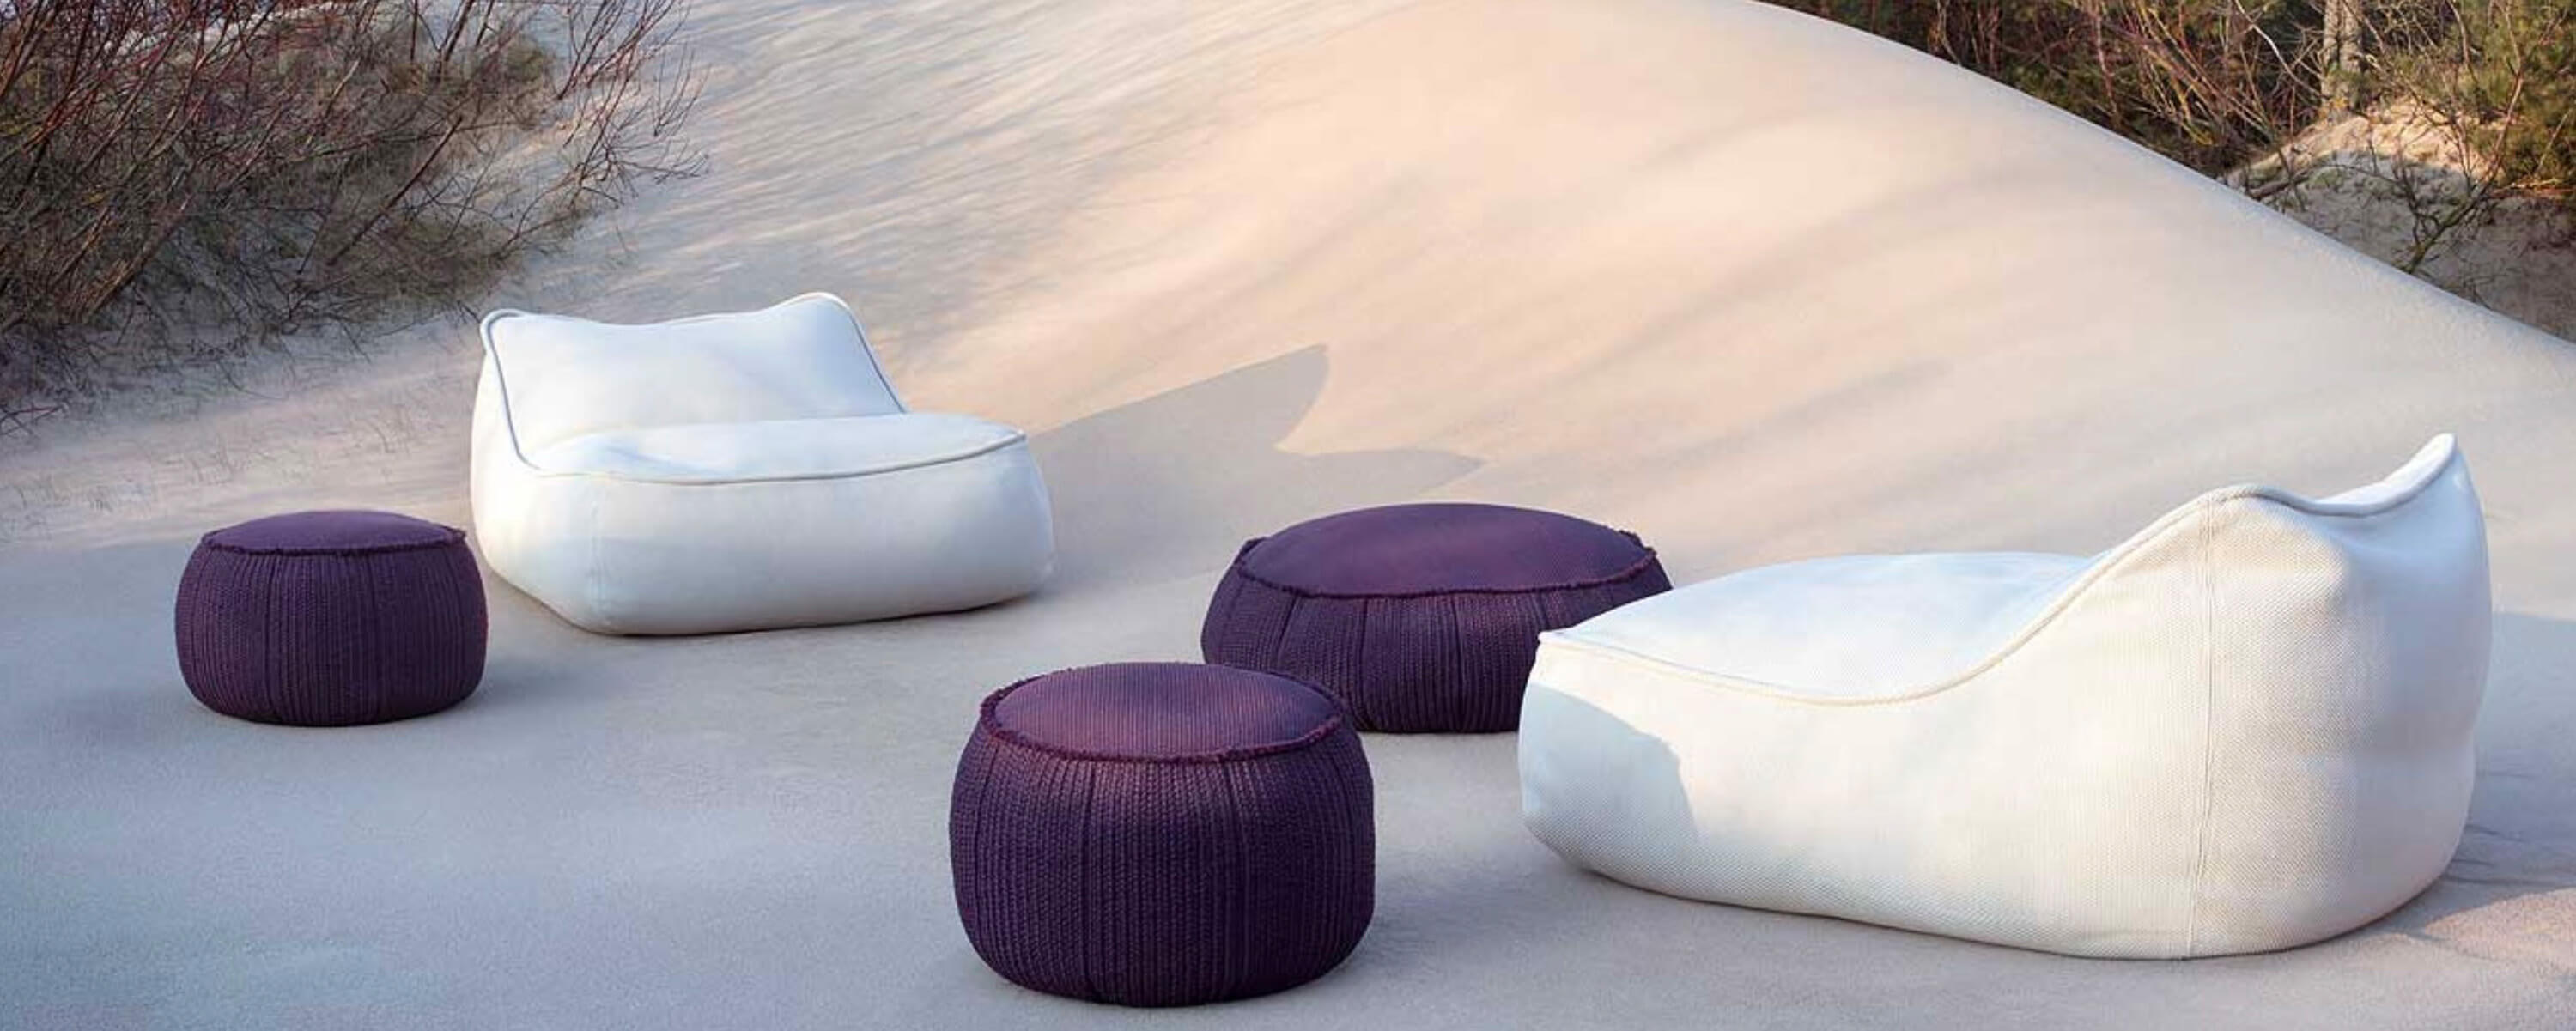 paola lenti float daybed dunas living